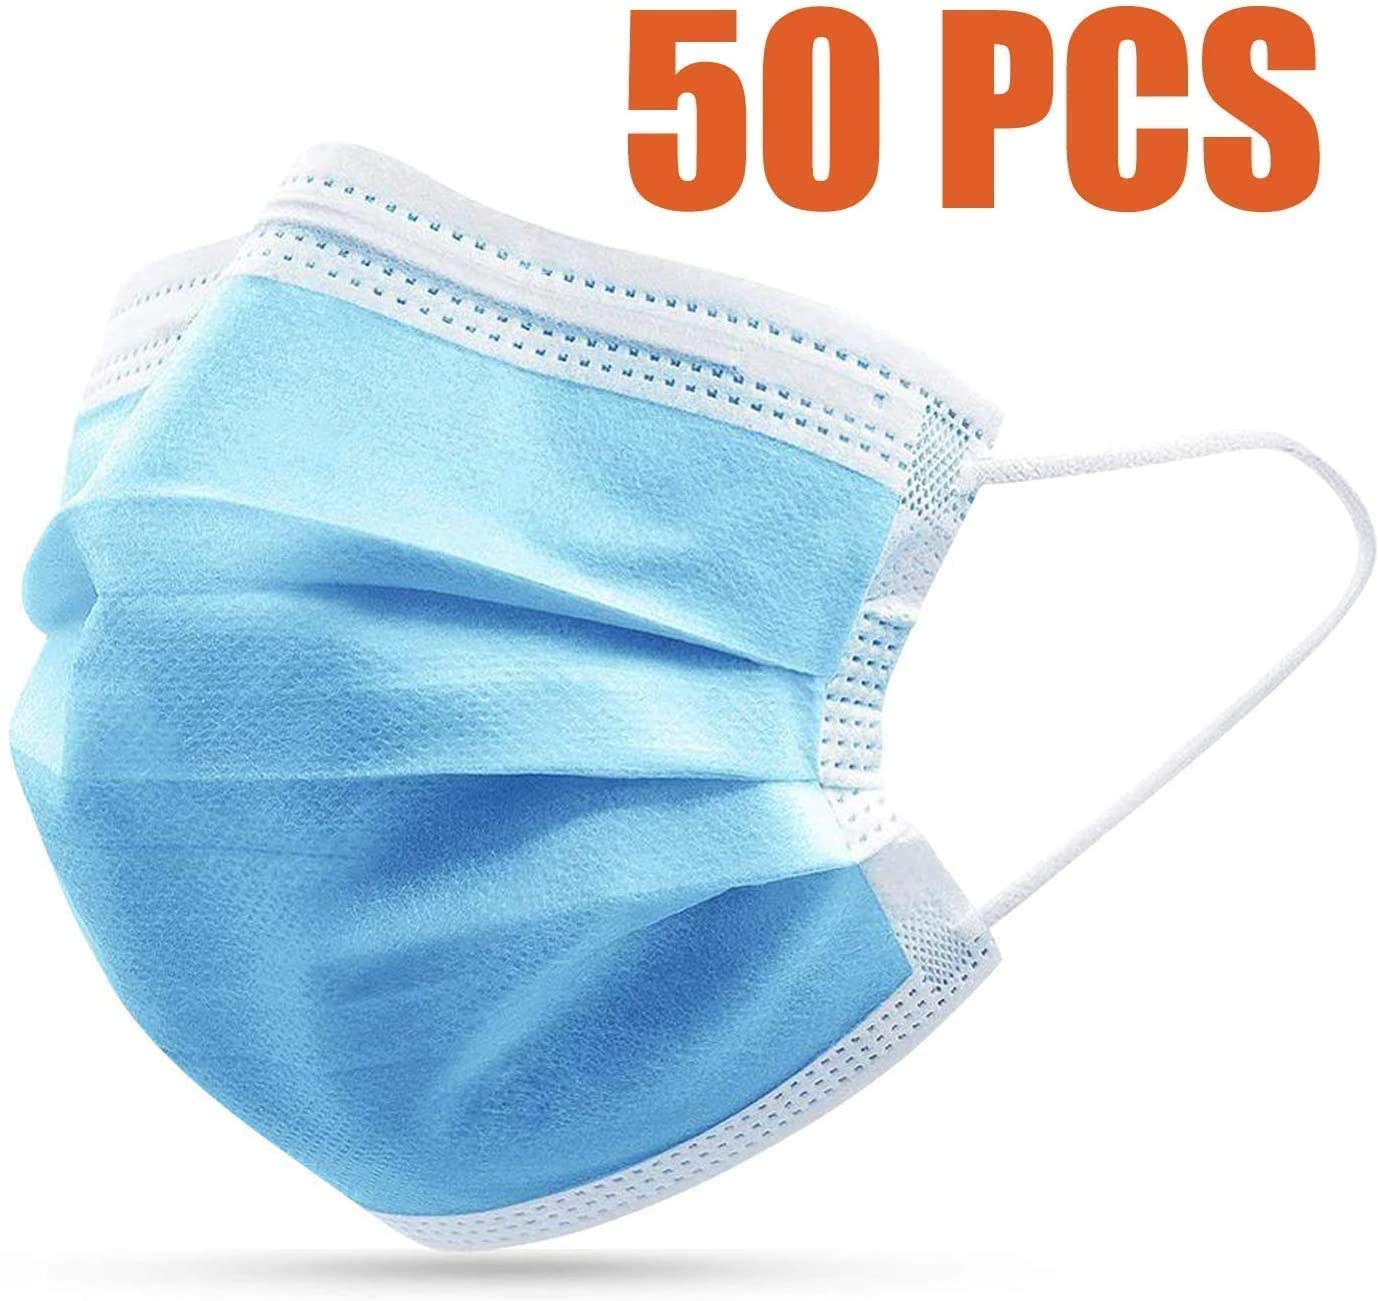 BBS 50Pcs Disposable Face 3 Ply Filter with Elastic Earloop, 3 Layer Filter Safety Dust